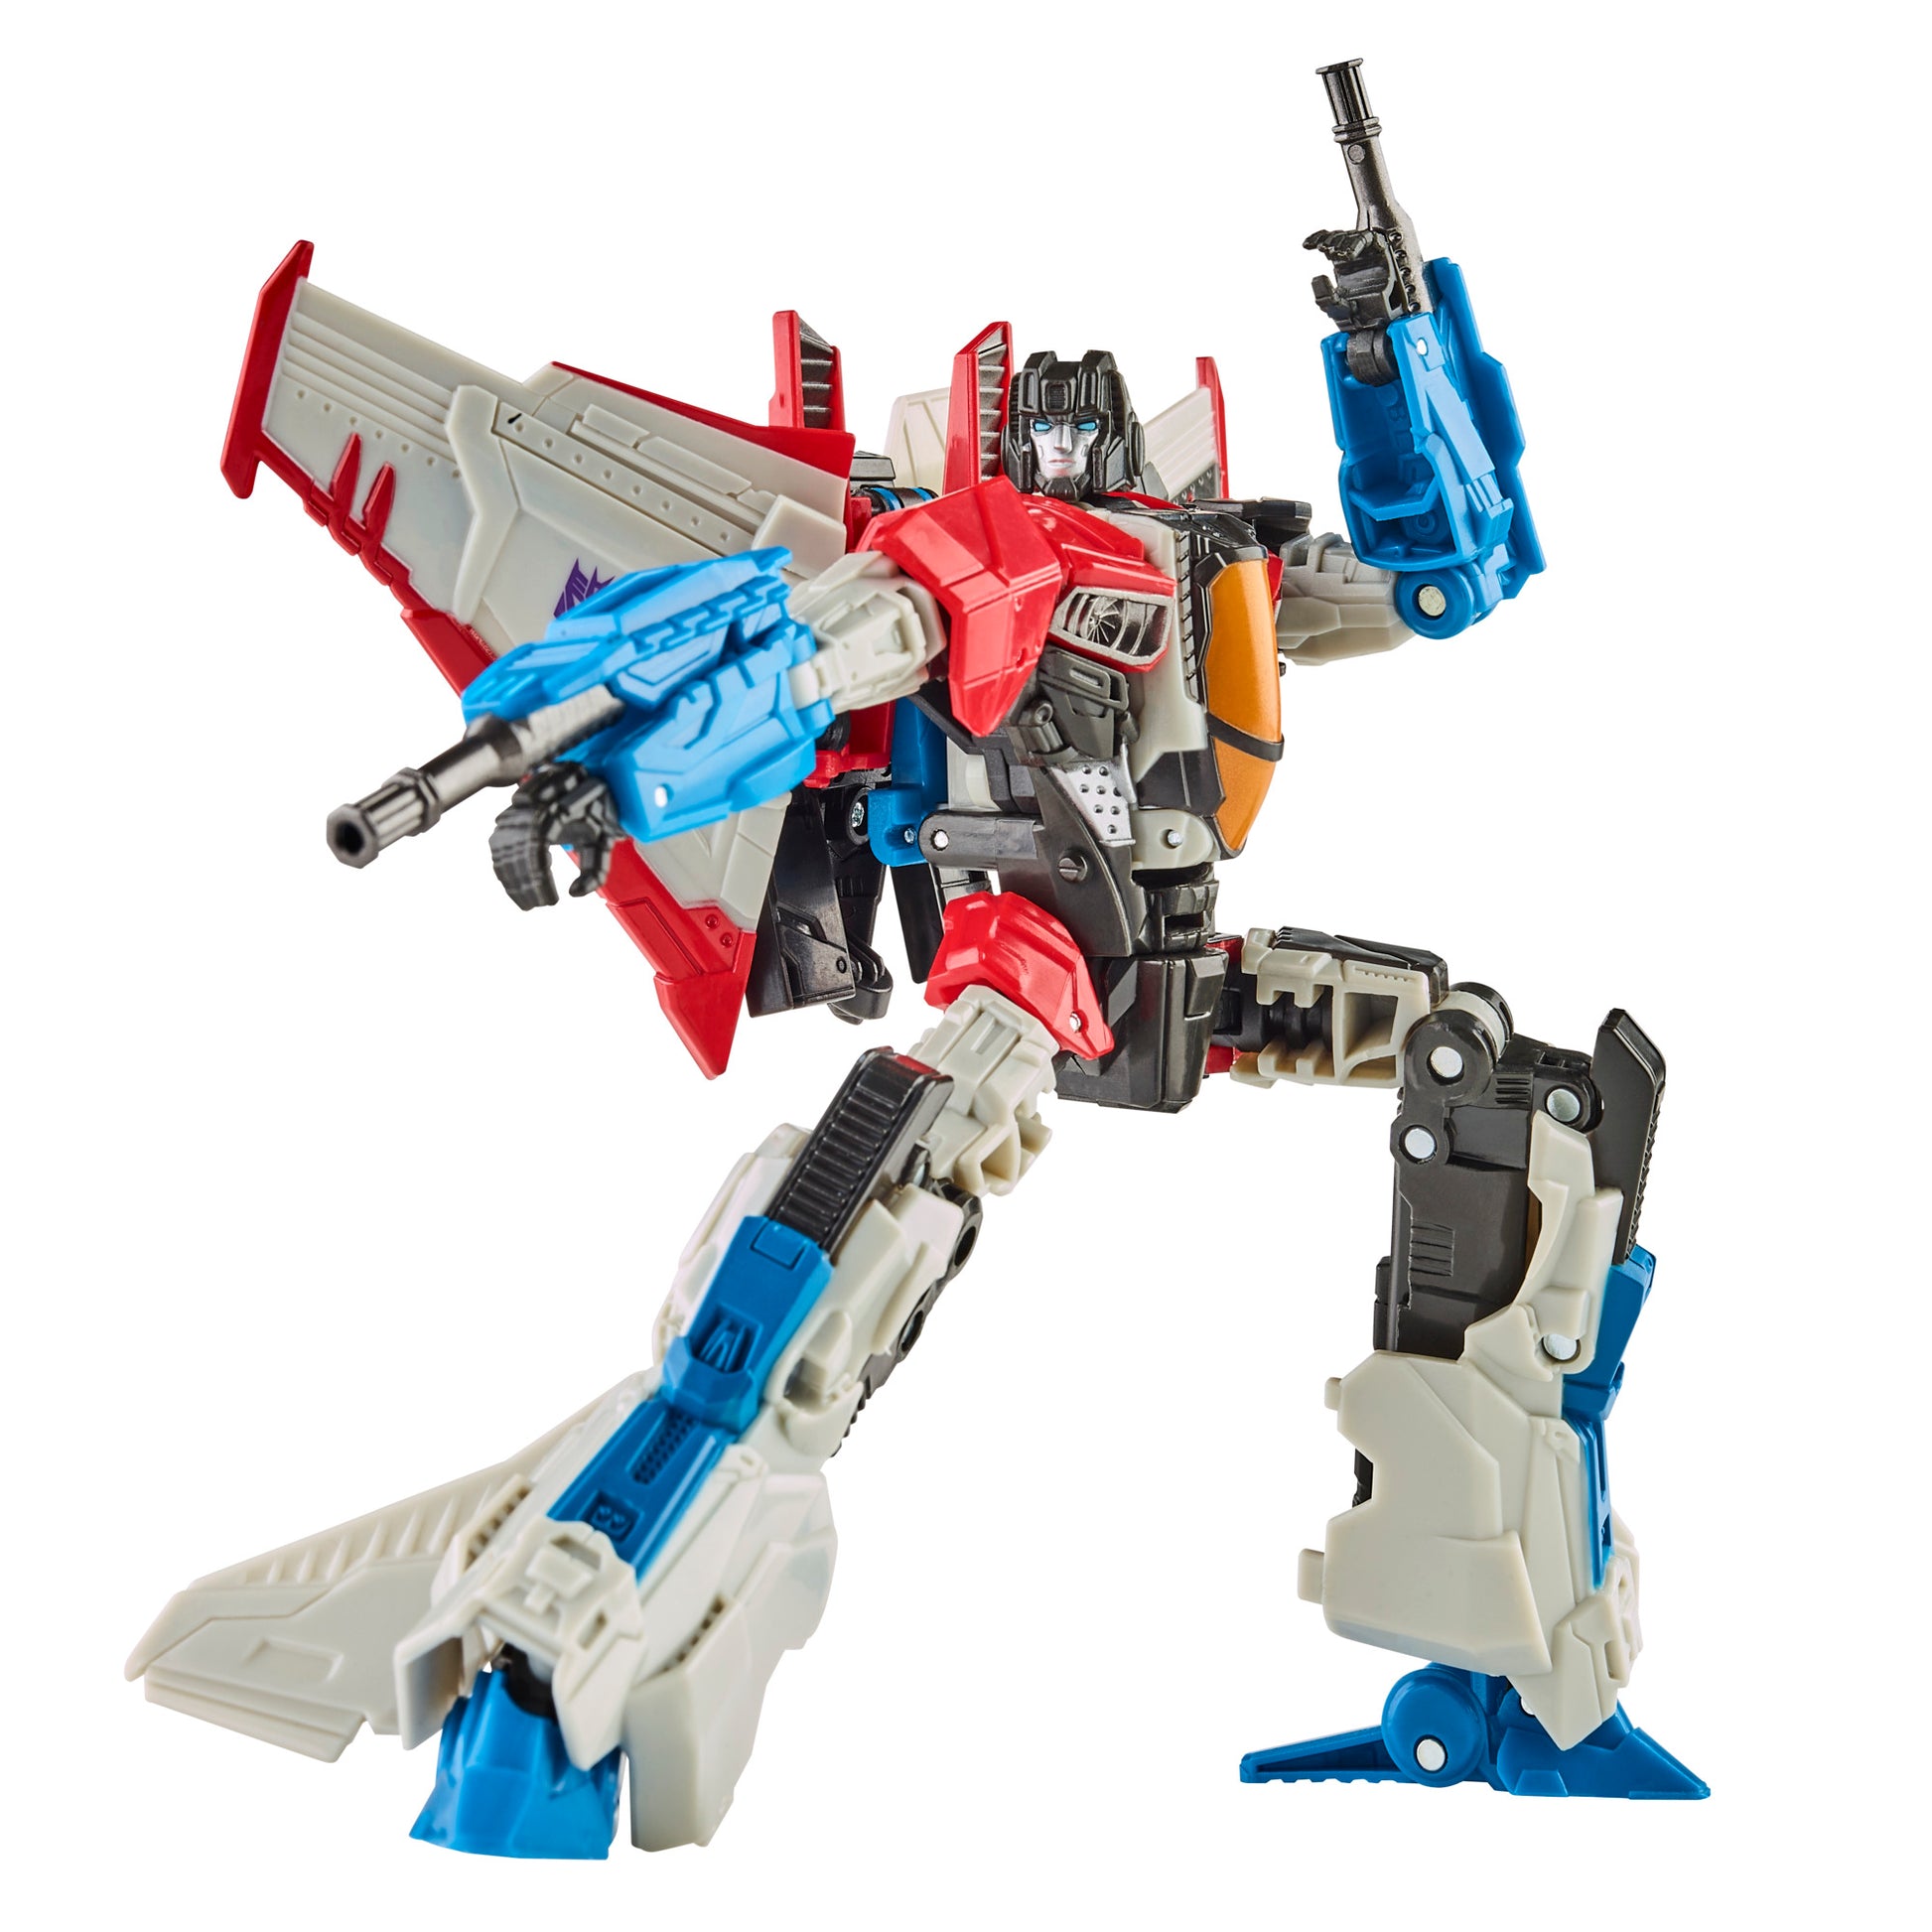 Transformers: Reactivate Video Game-Inspired Bumblebee and Starscream Action Figures